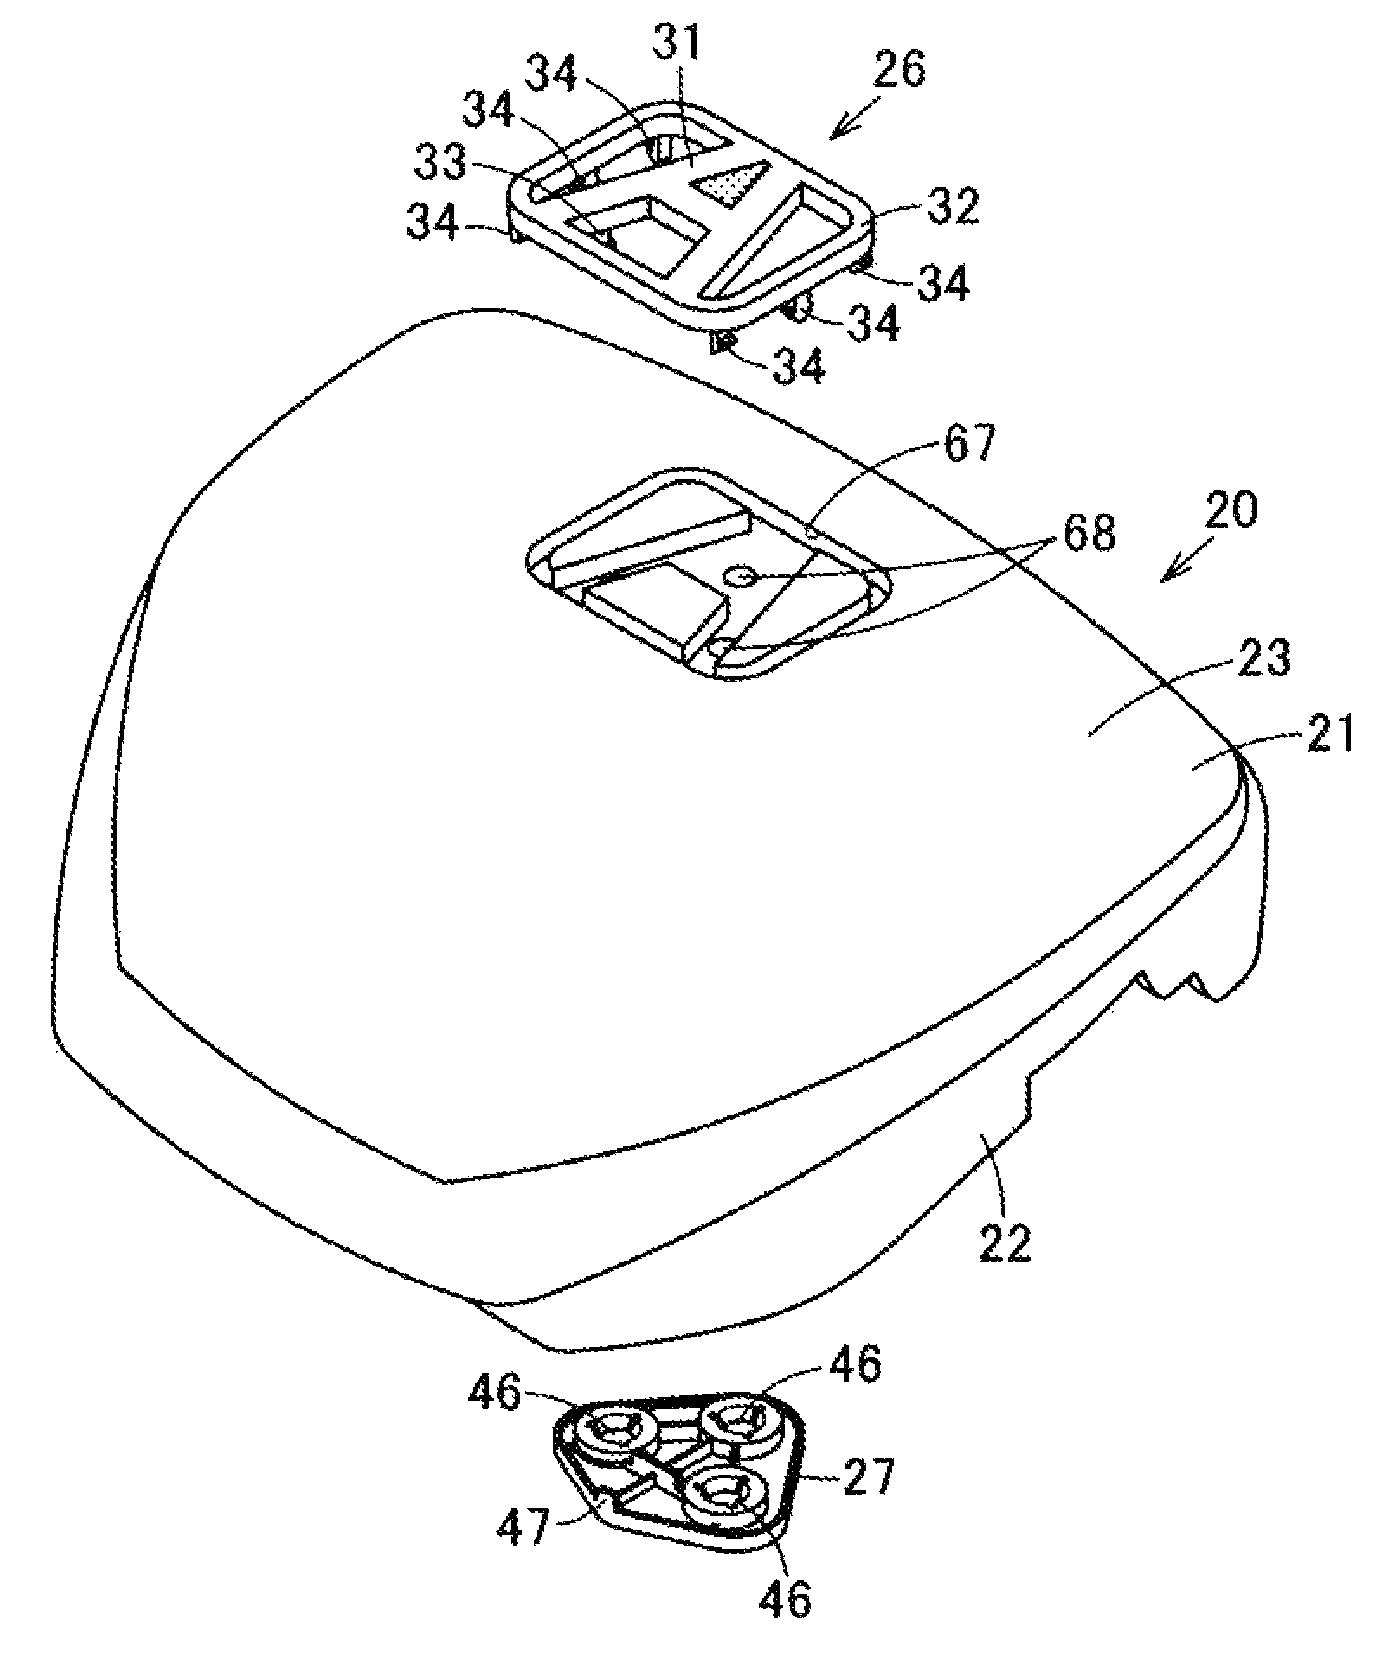 Cover body for airbag device